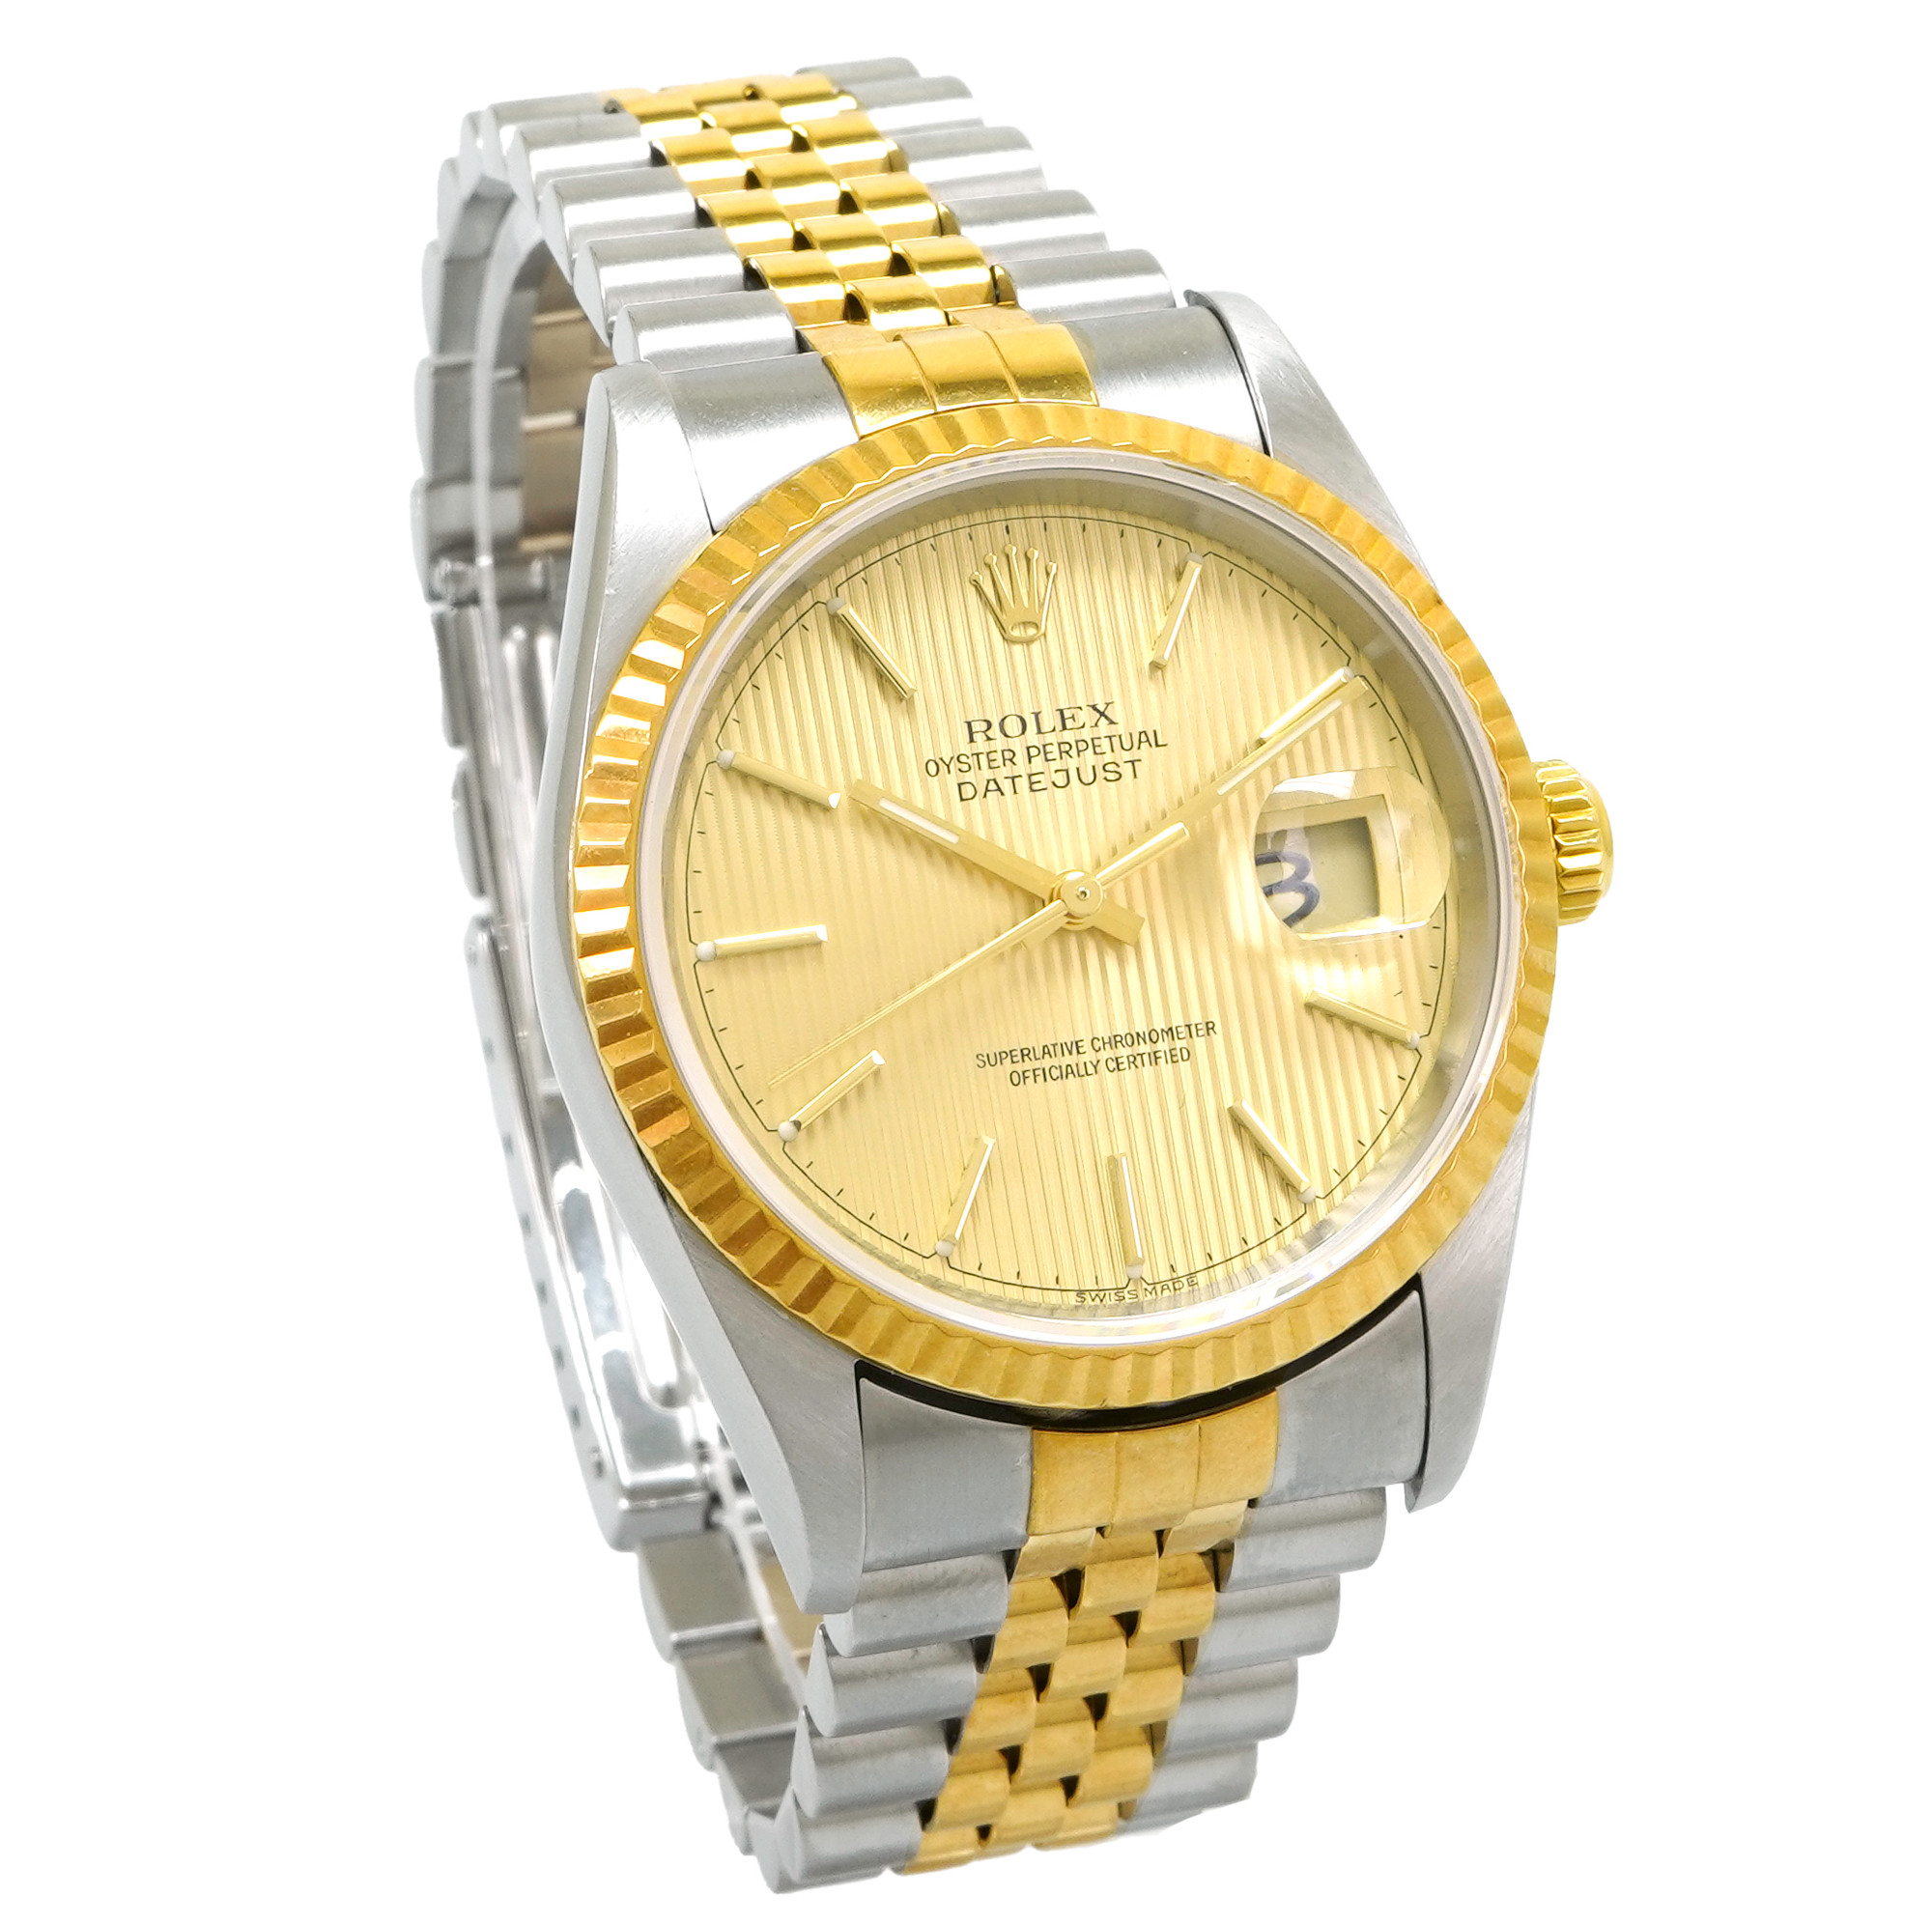 Rolex Datejust 36 Champagne Tapestry Dial 16233 *2004* - Inventory 4202